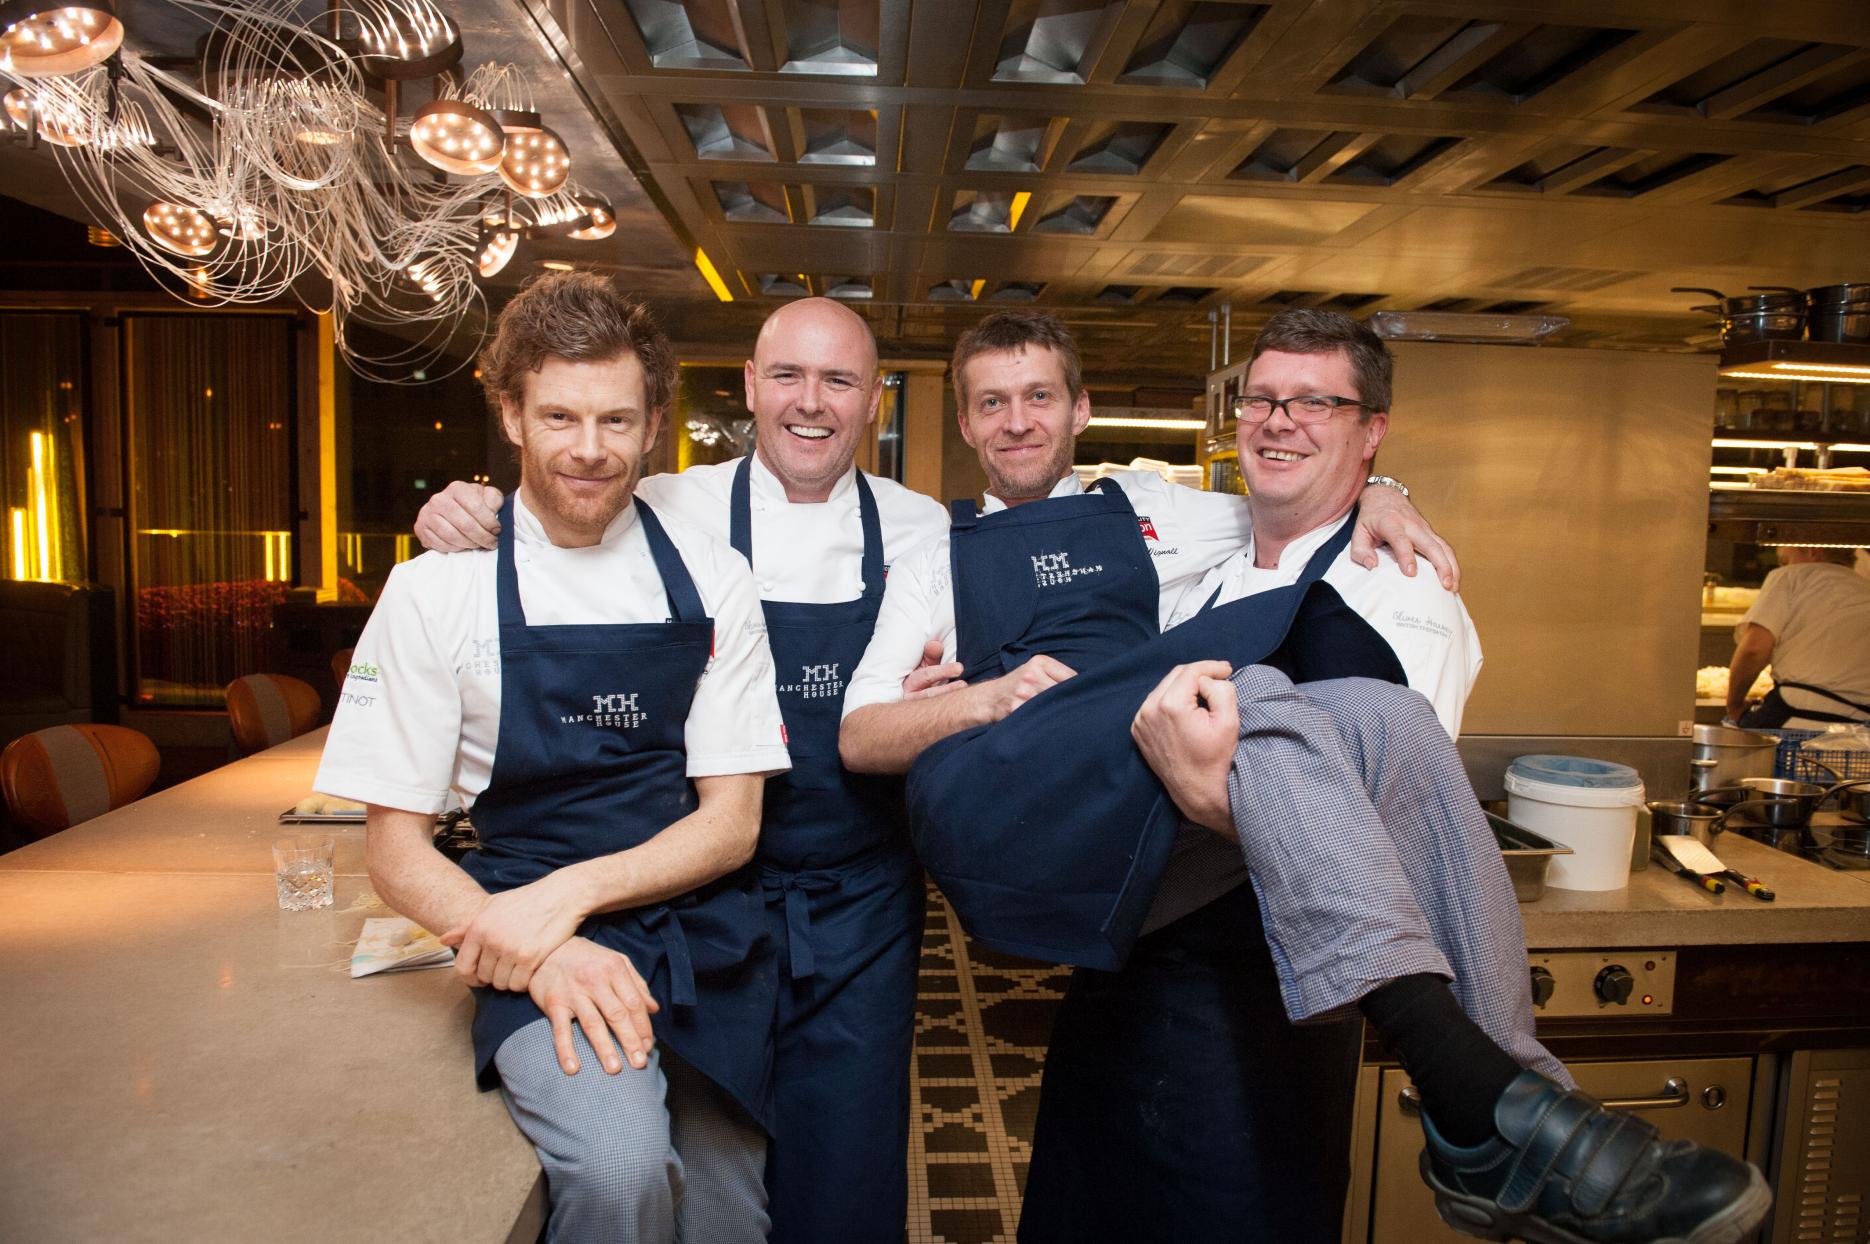 Chefs cook up a storm for Hospitality Action